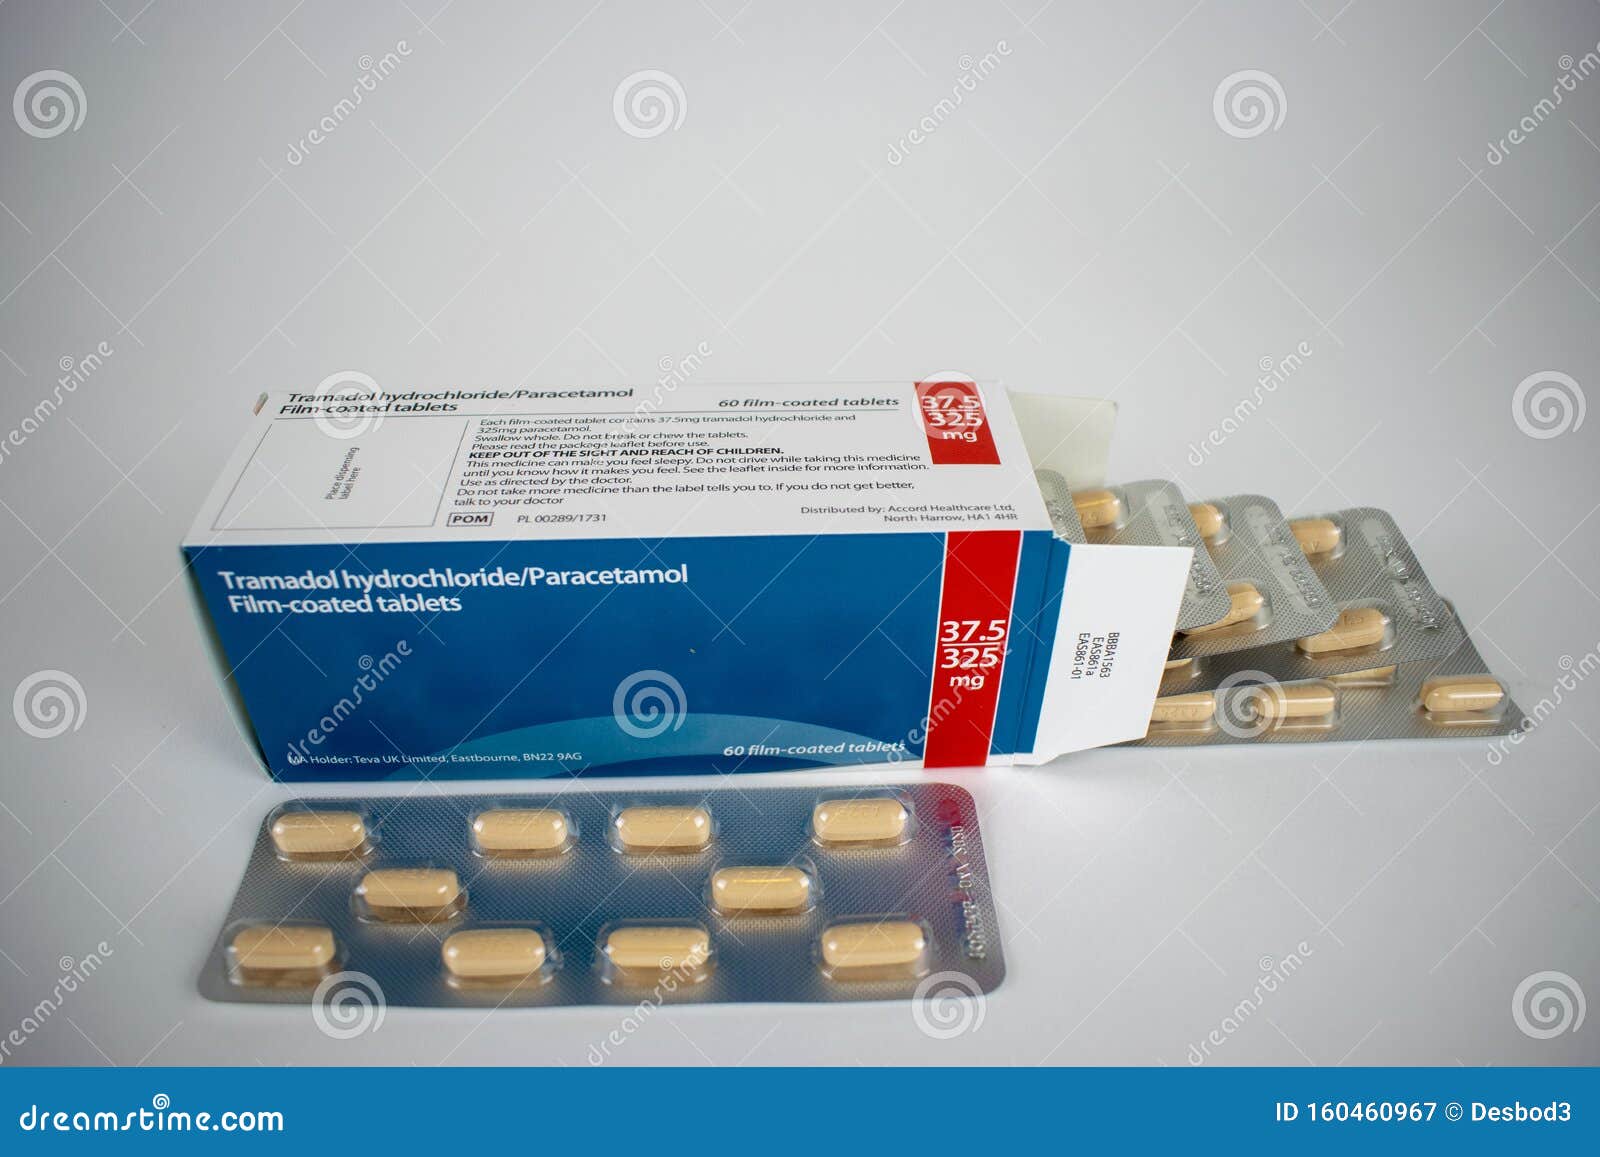 Tramadol Photos Free Royalty Free Stock Photos From Dreamstime